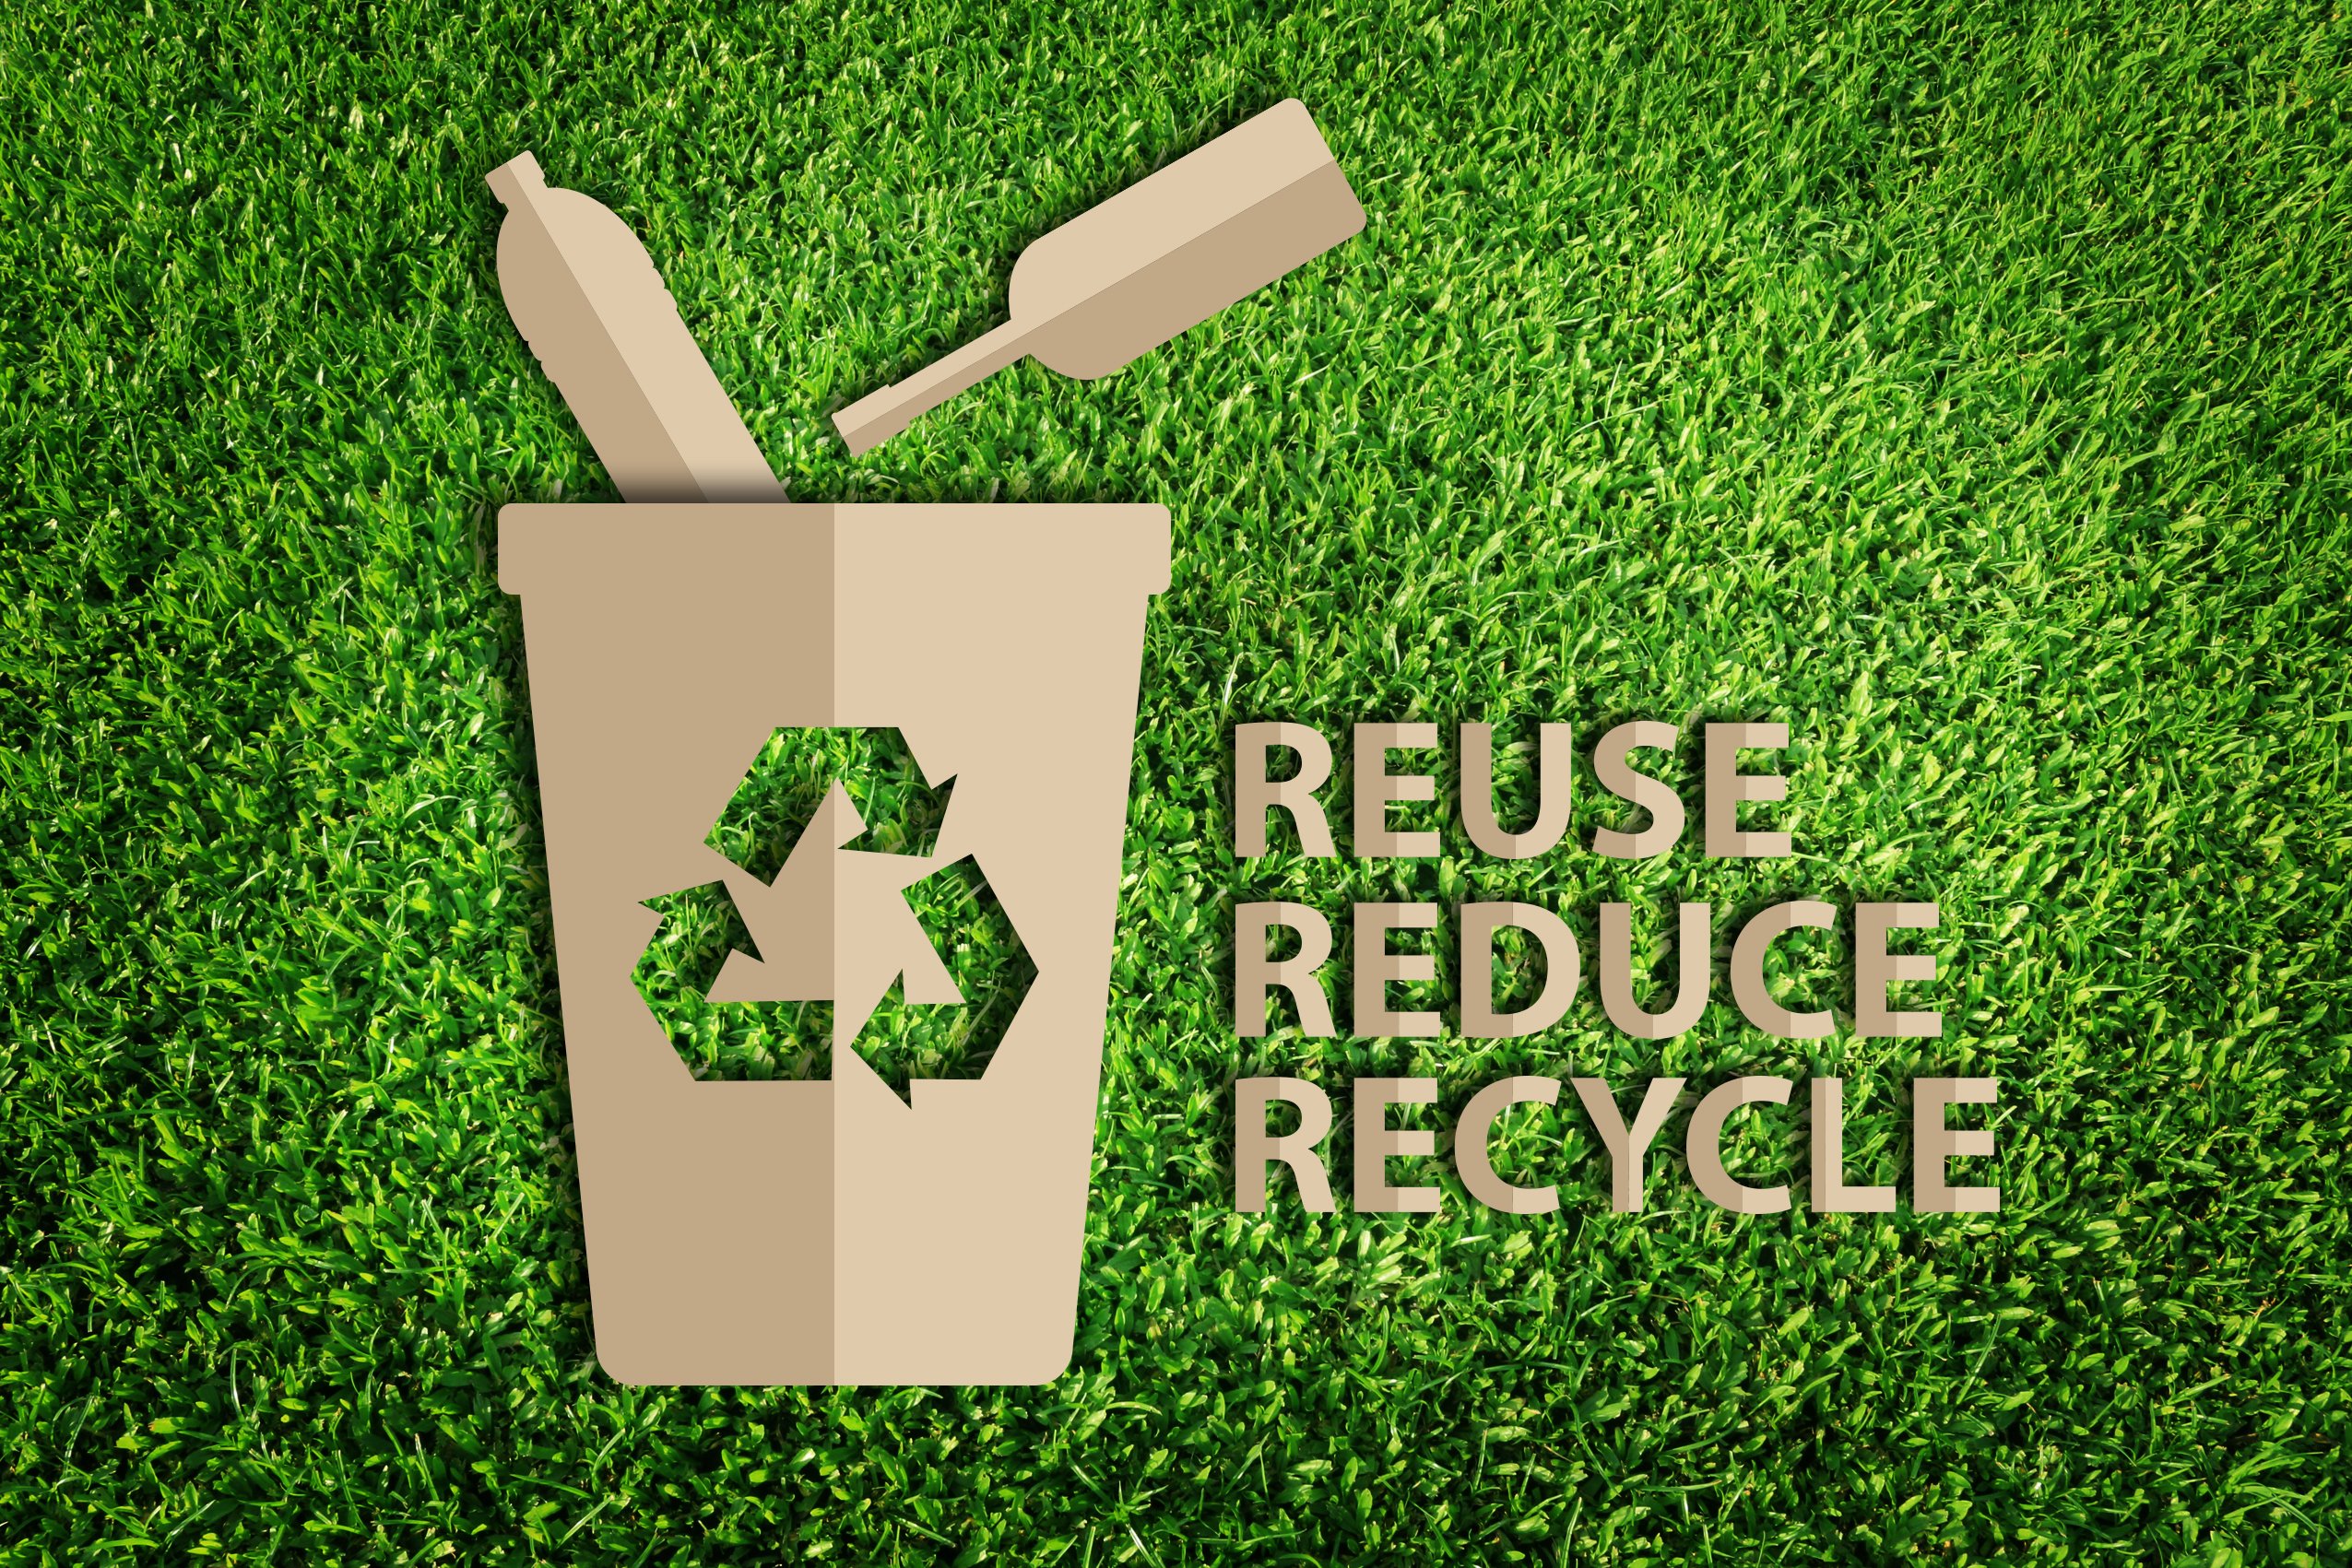 Save package. Reduce reuse recycle. Знак reduce reuse recycle. 3 RS reduce recycle reuse. Концепция 3r reduce reuse recycle.